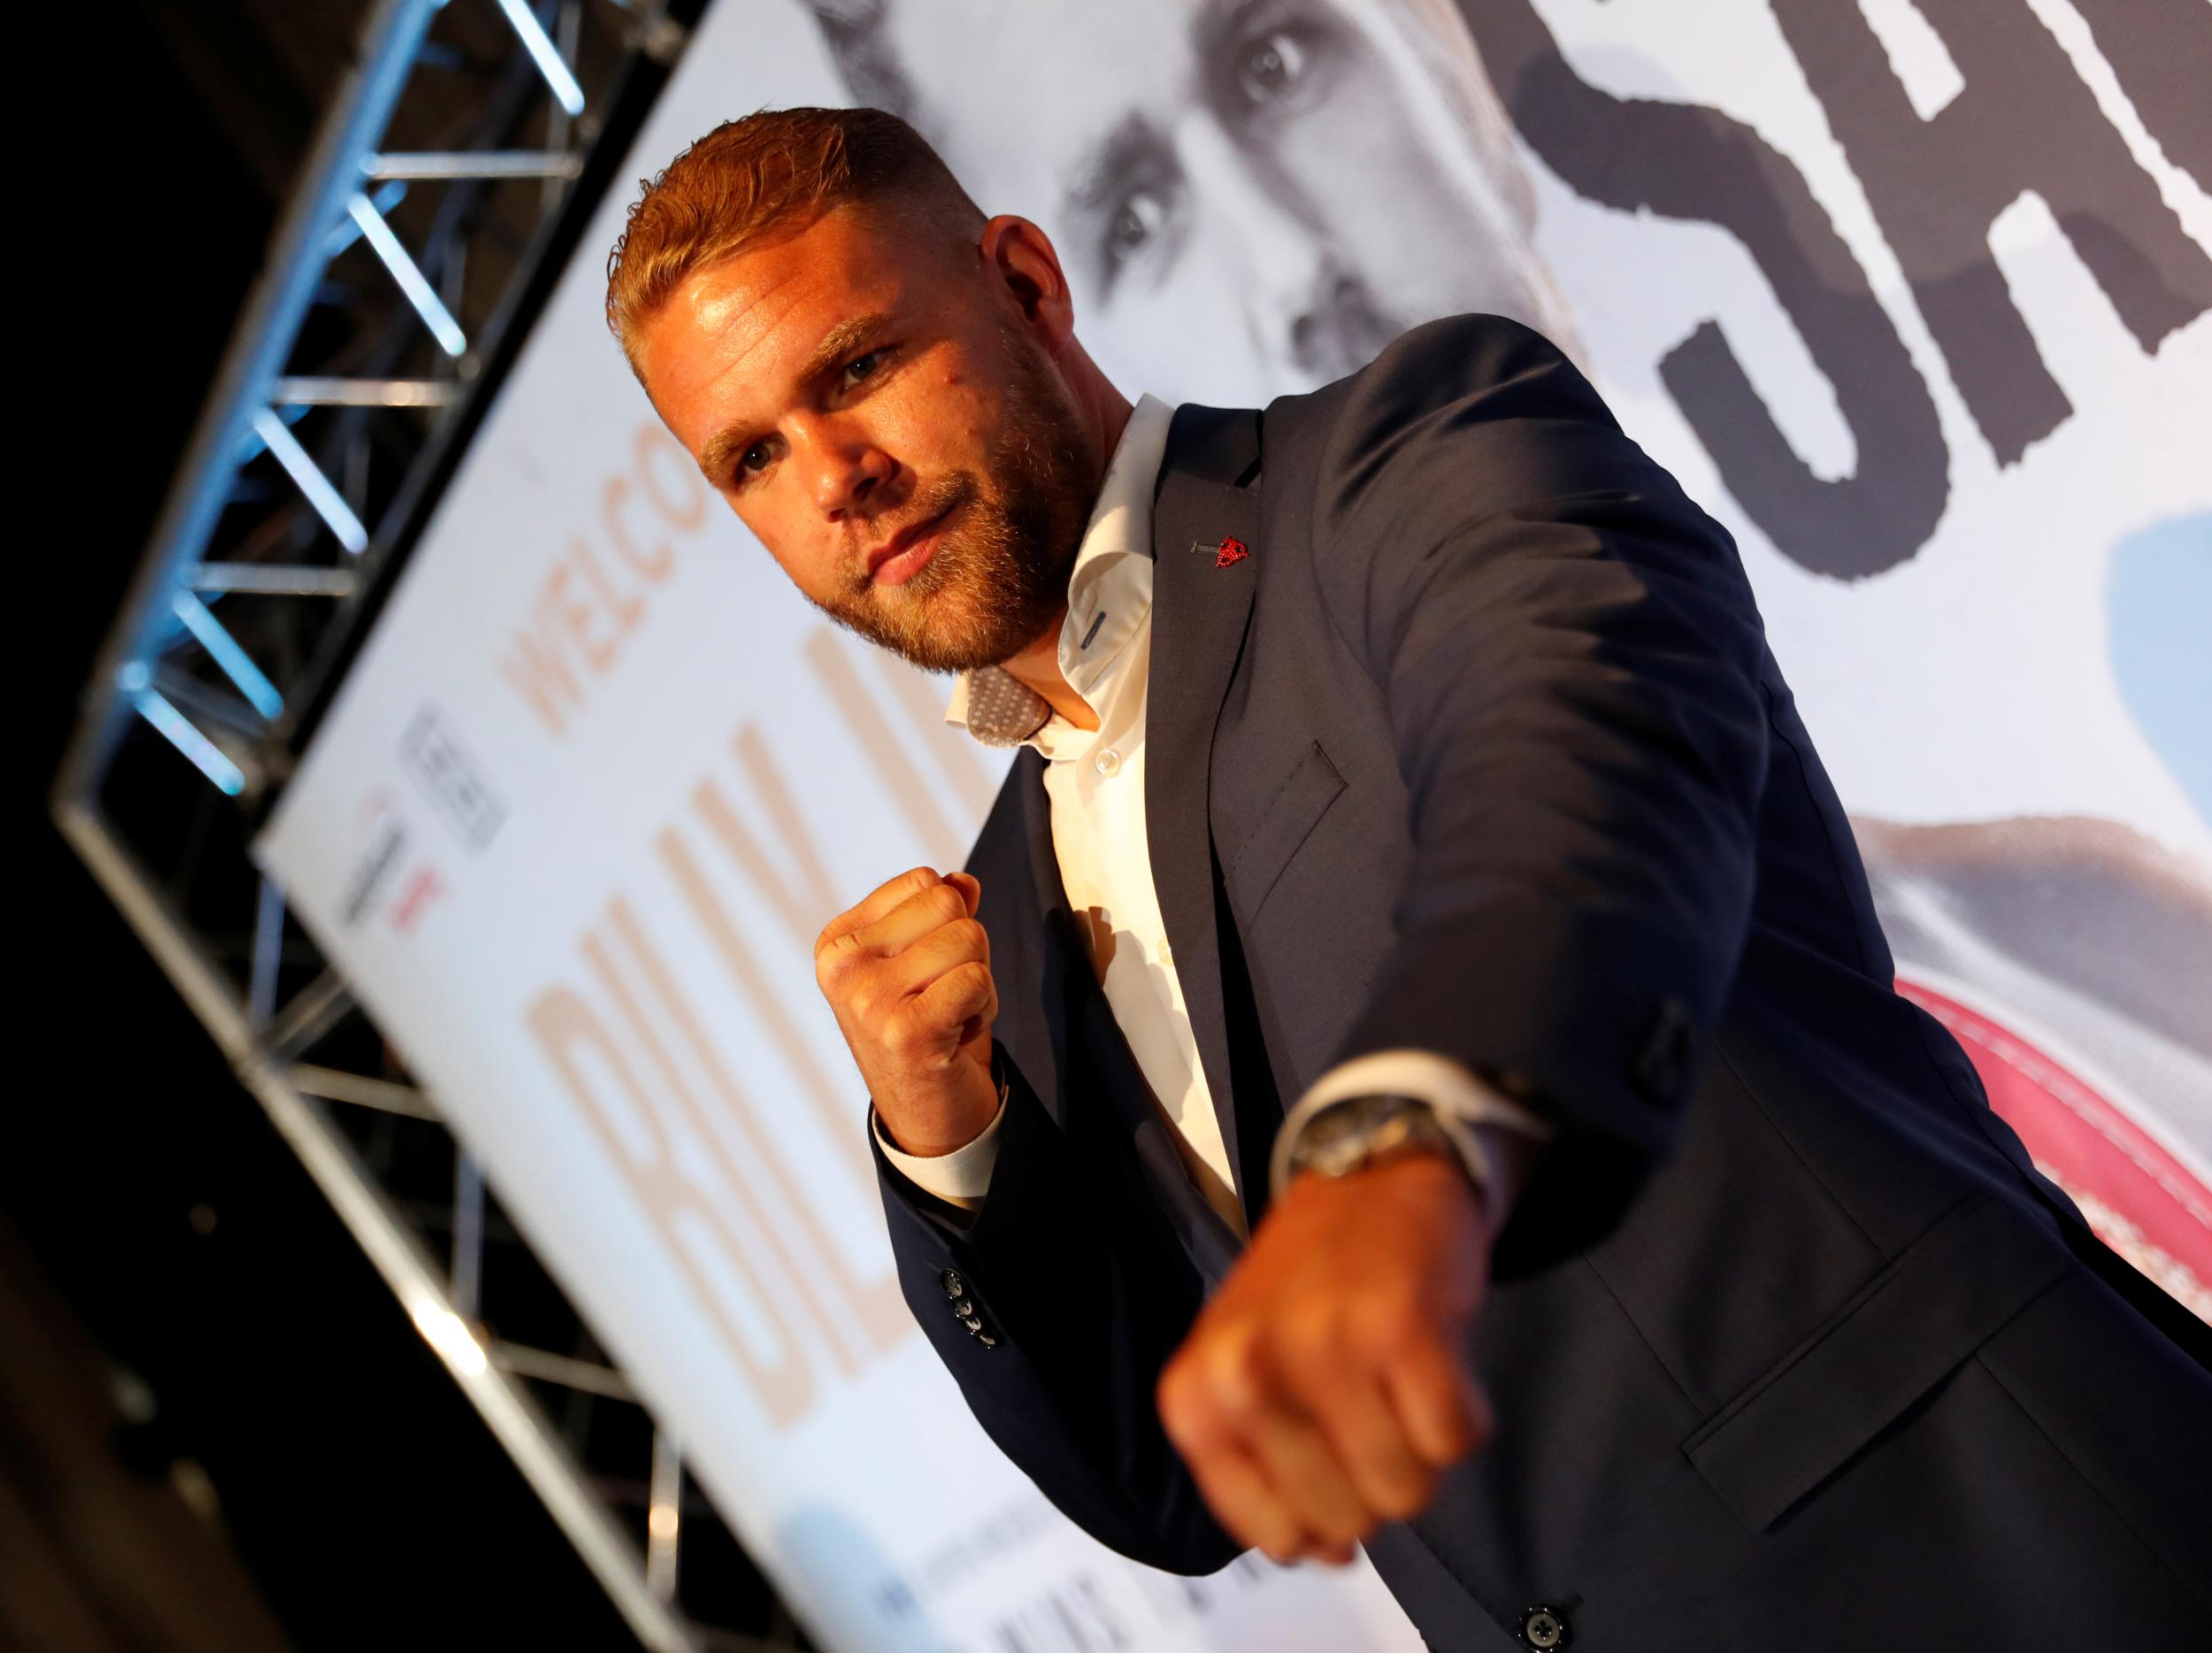 Saunders is set for a high-profile return to the ring under Hearn